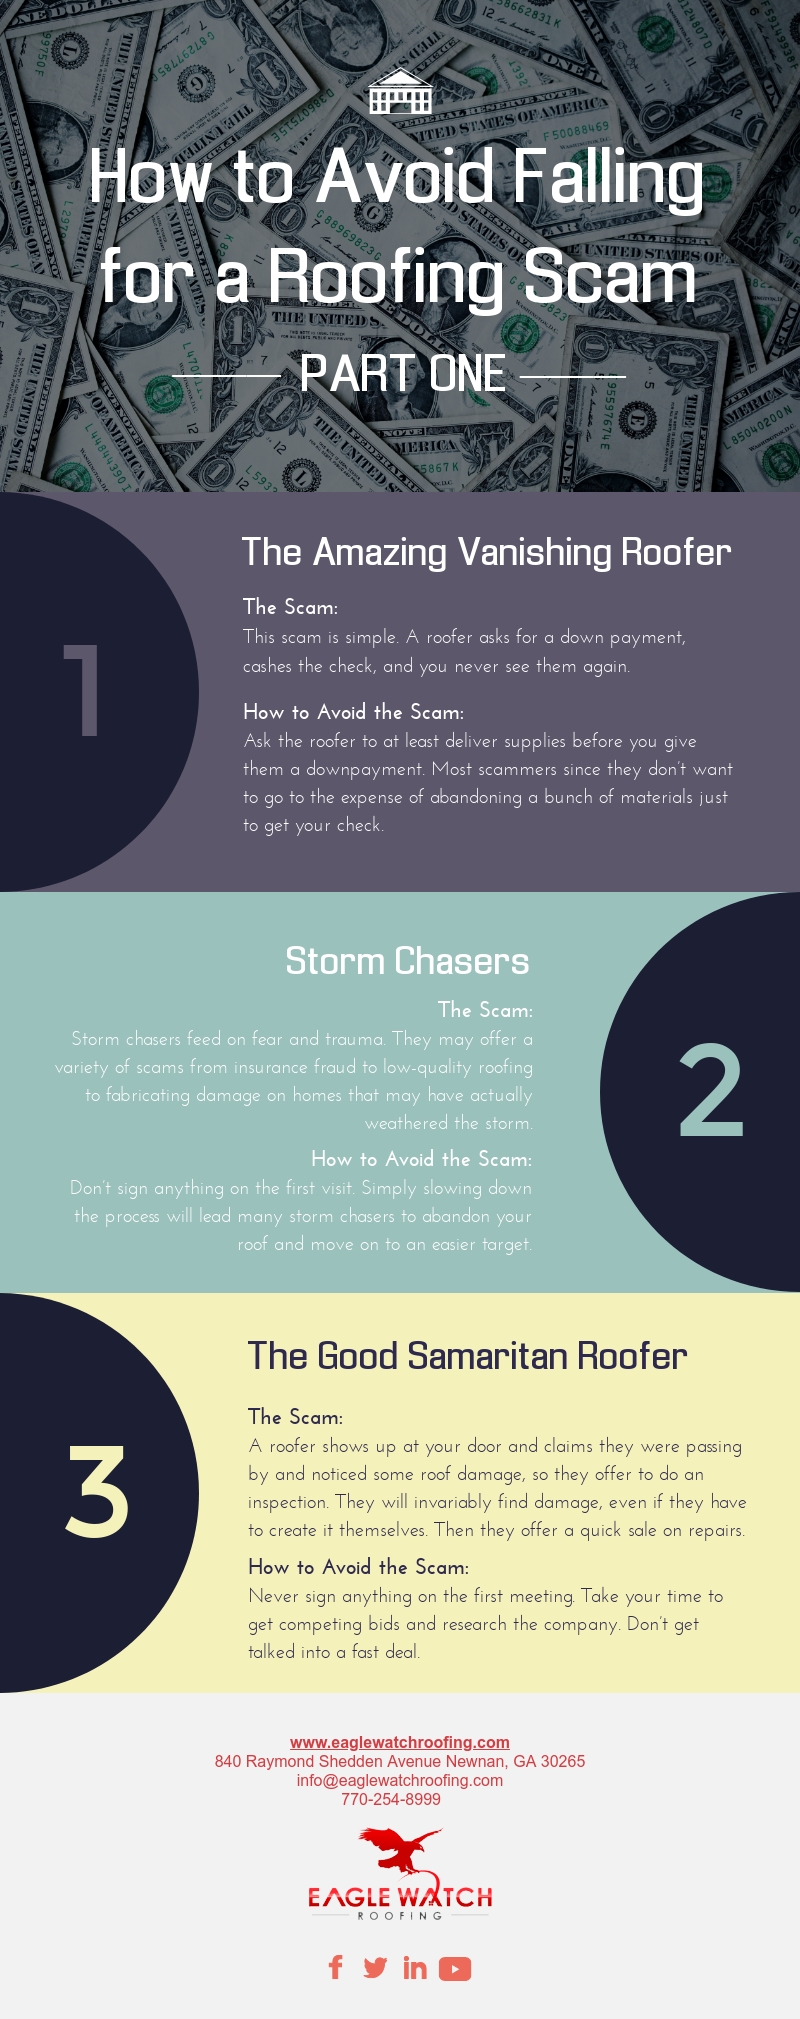 How to Avoid Falling for a Roofing Scam - Part One [infographic]